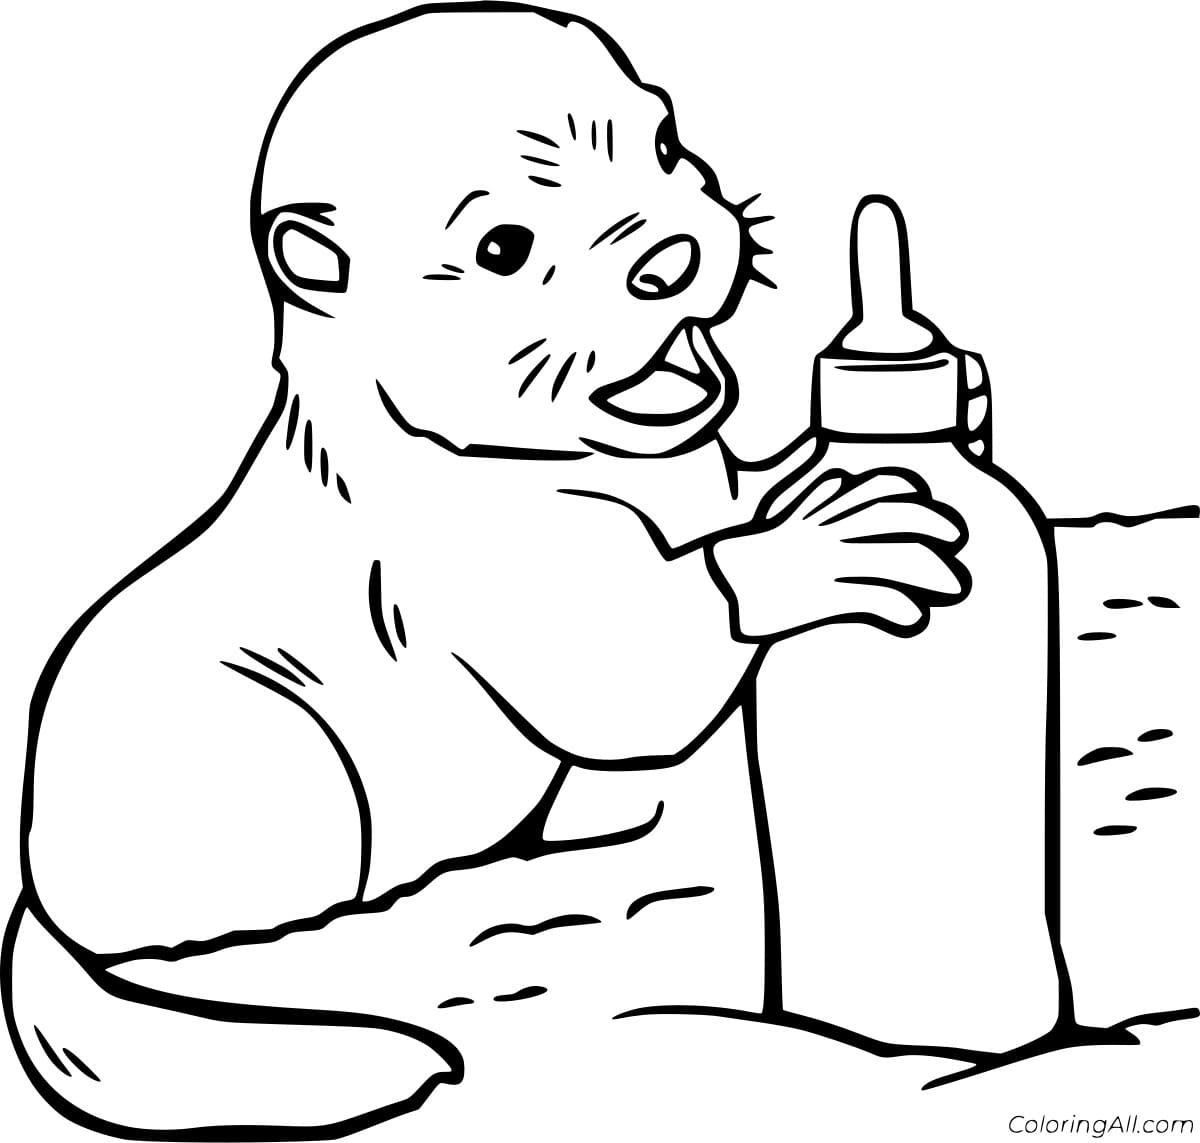 Baby Otter Holds a Milk Bottle Free Printable Coloring Page